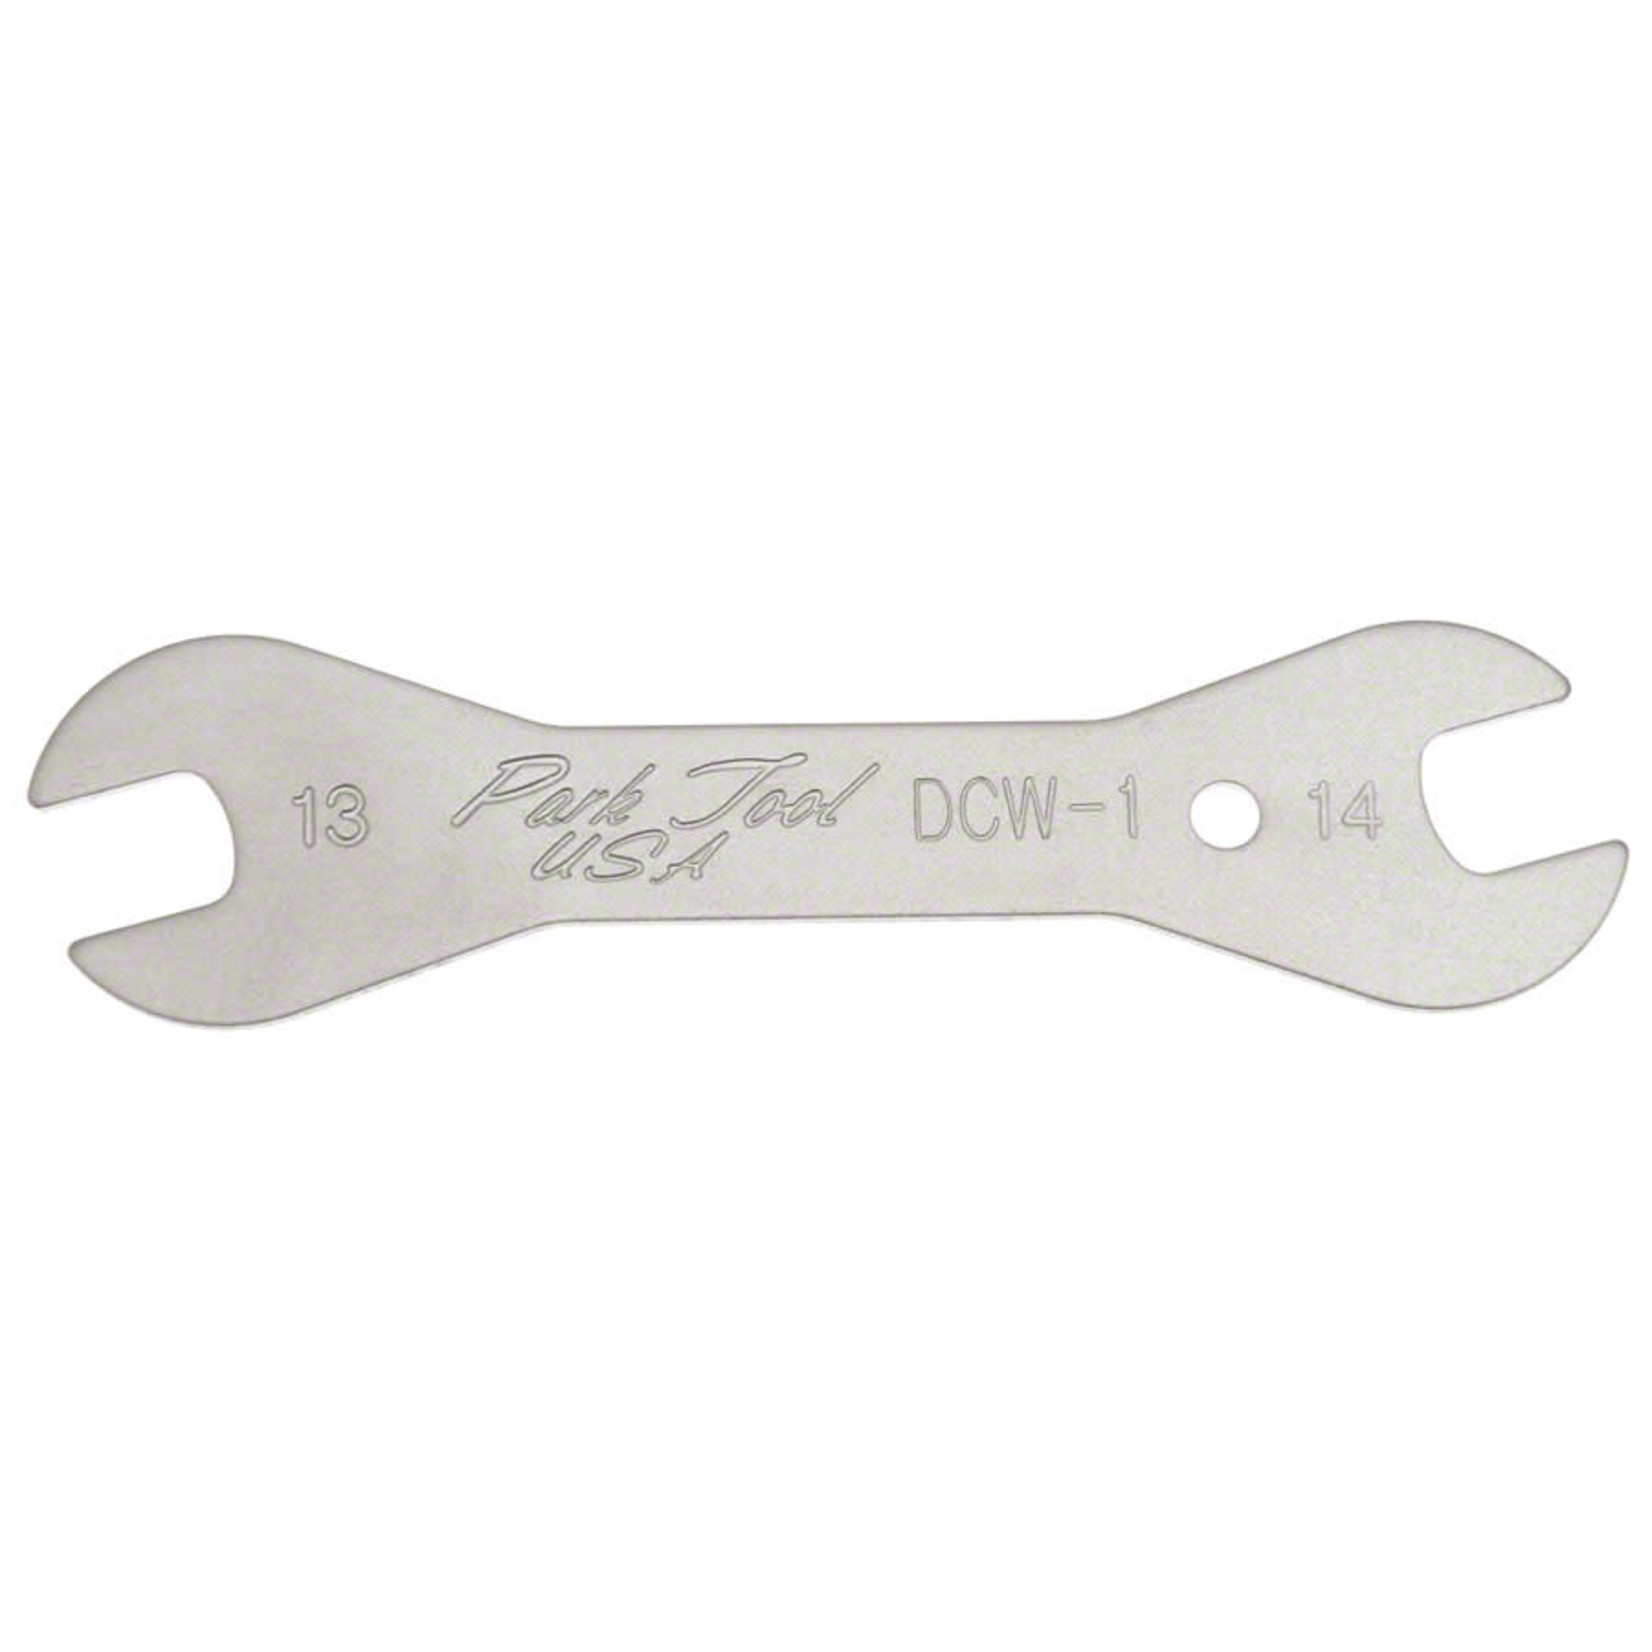 Park Tool Park Tool DCW-1C Double-Ended Cone Wrench: 13.0mm and 14.0mm